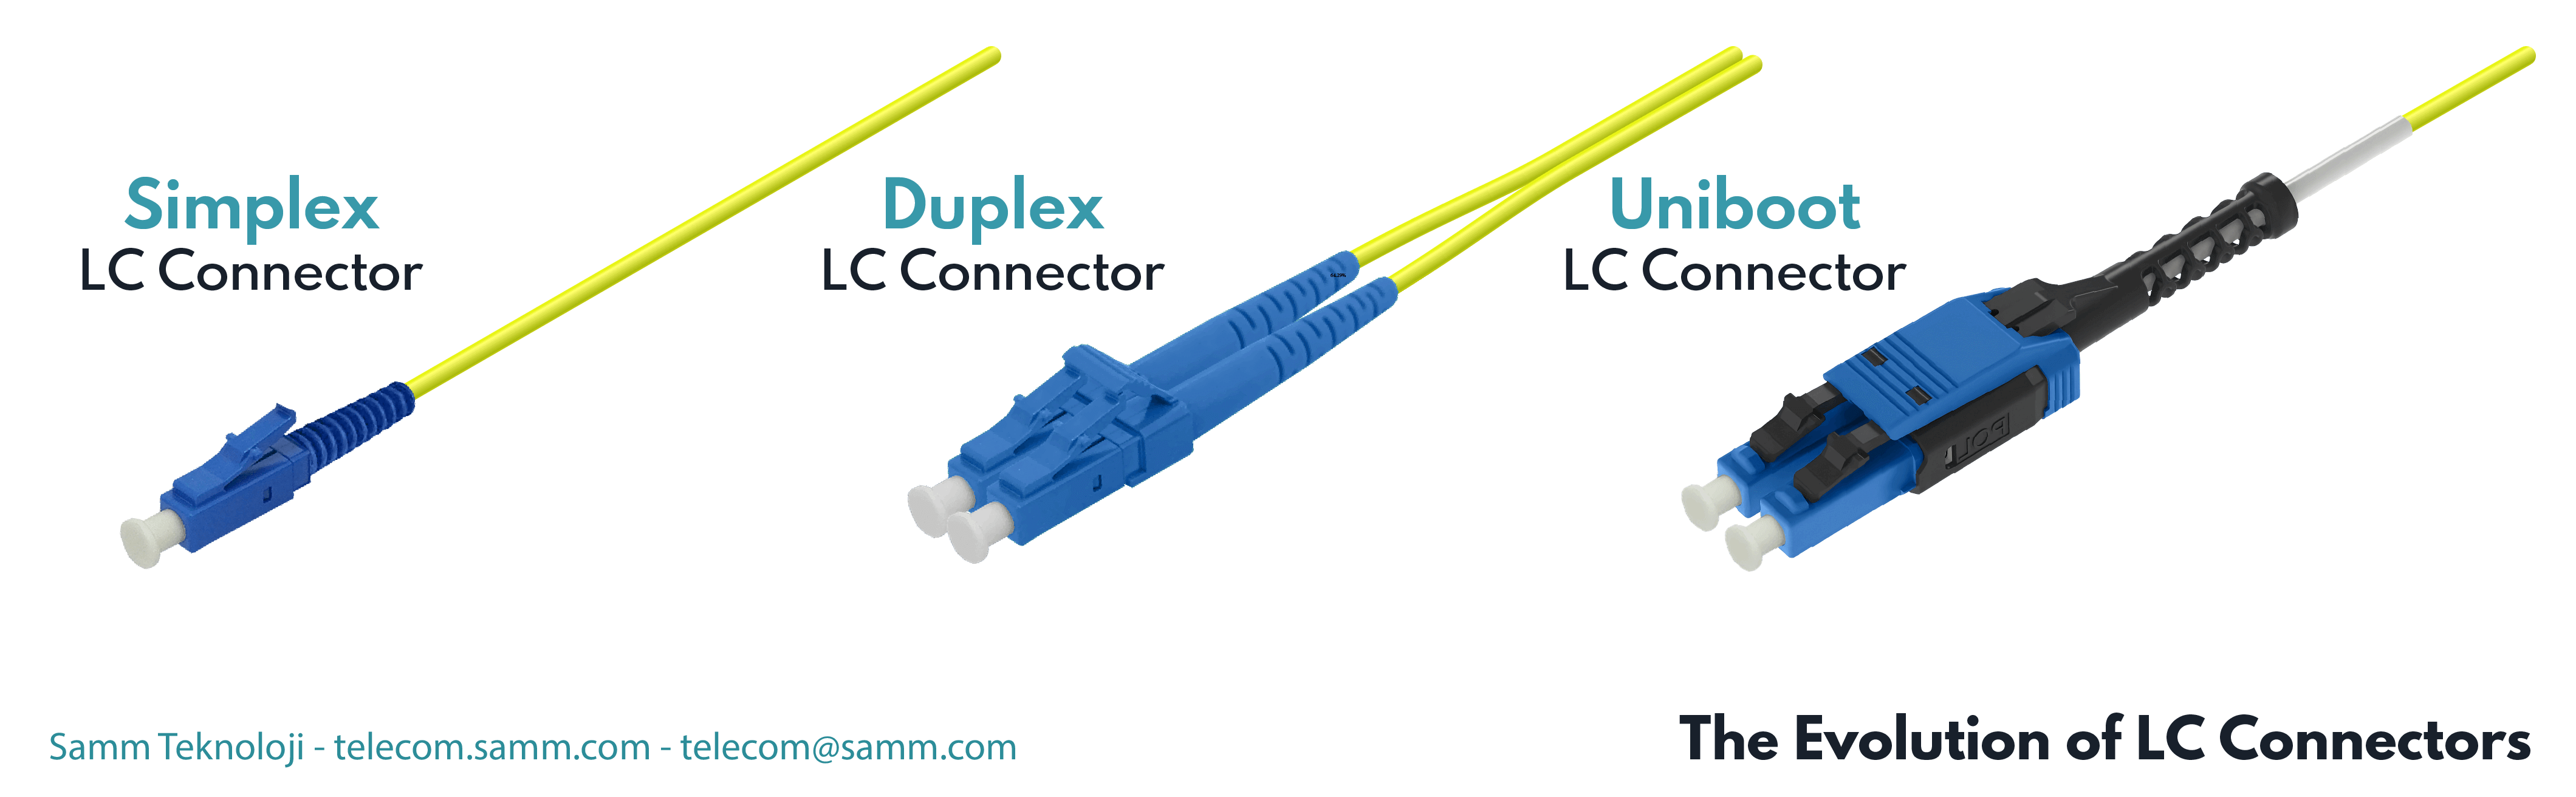 The Evolutions of LC Connectors